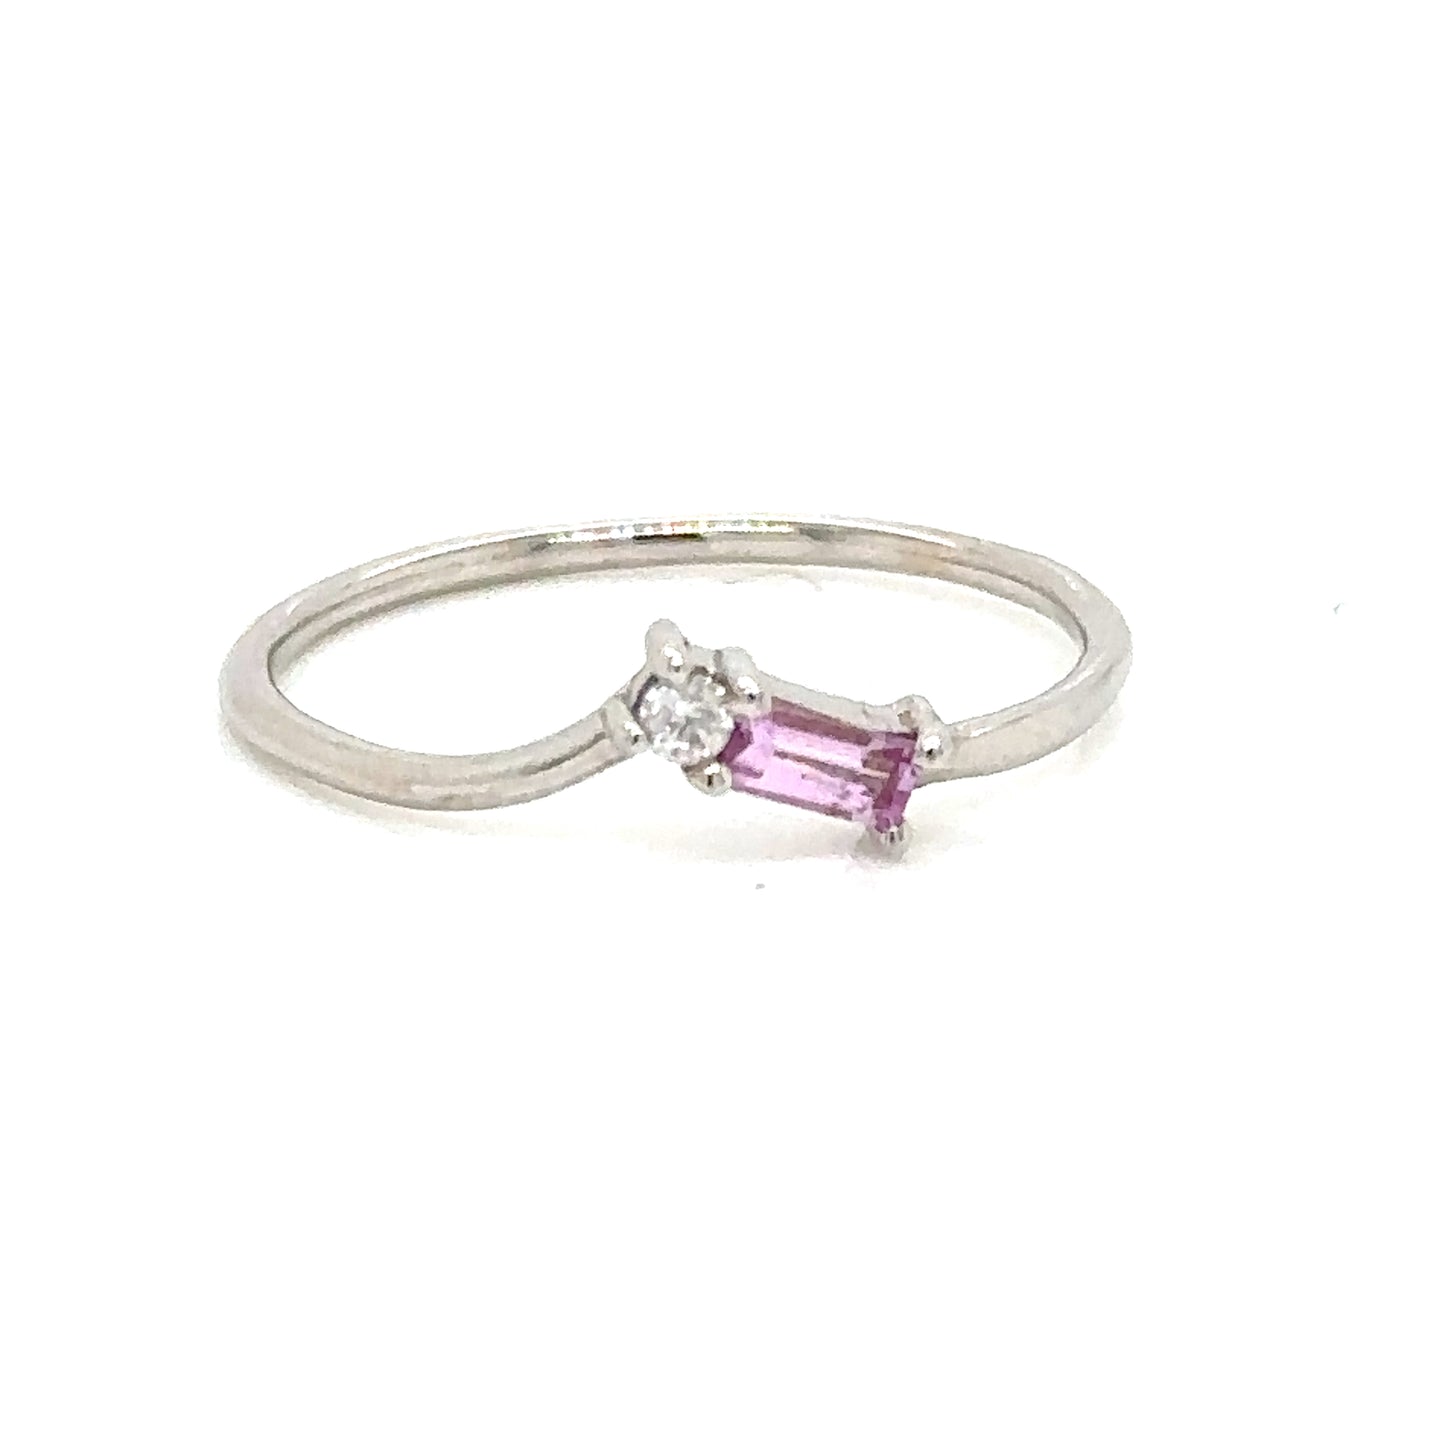 IMMEDIATE DELIVERY / Debanie Ring / Diamonds and Pink Sapphire / 14k white gold / Size 6.5